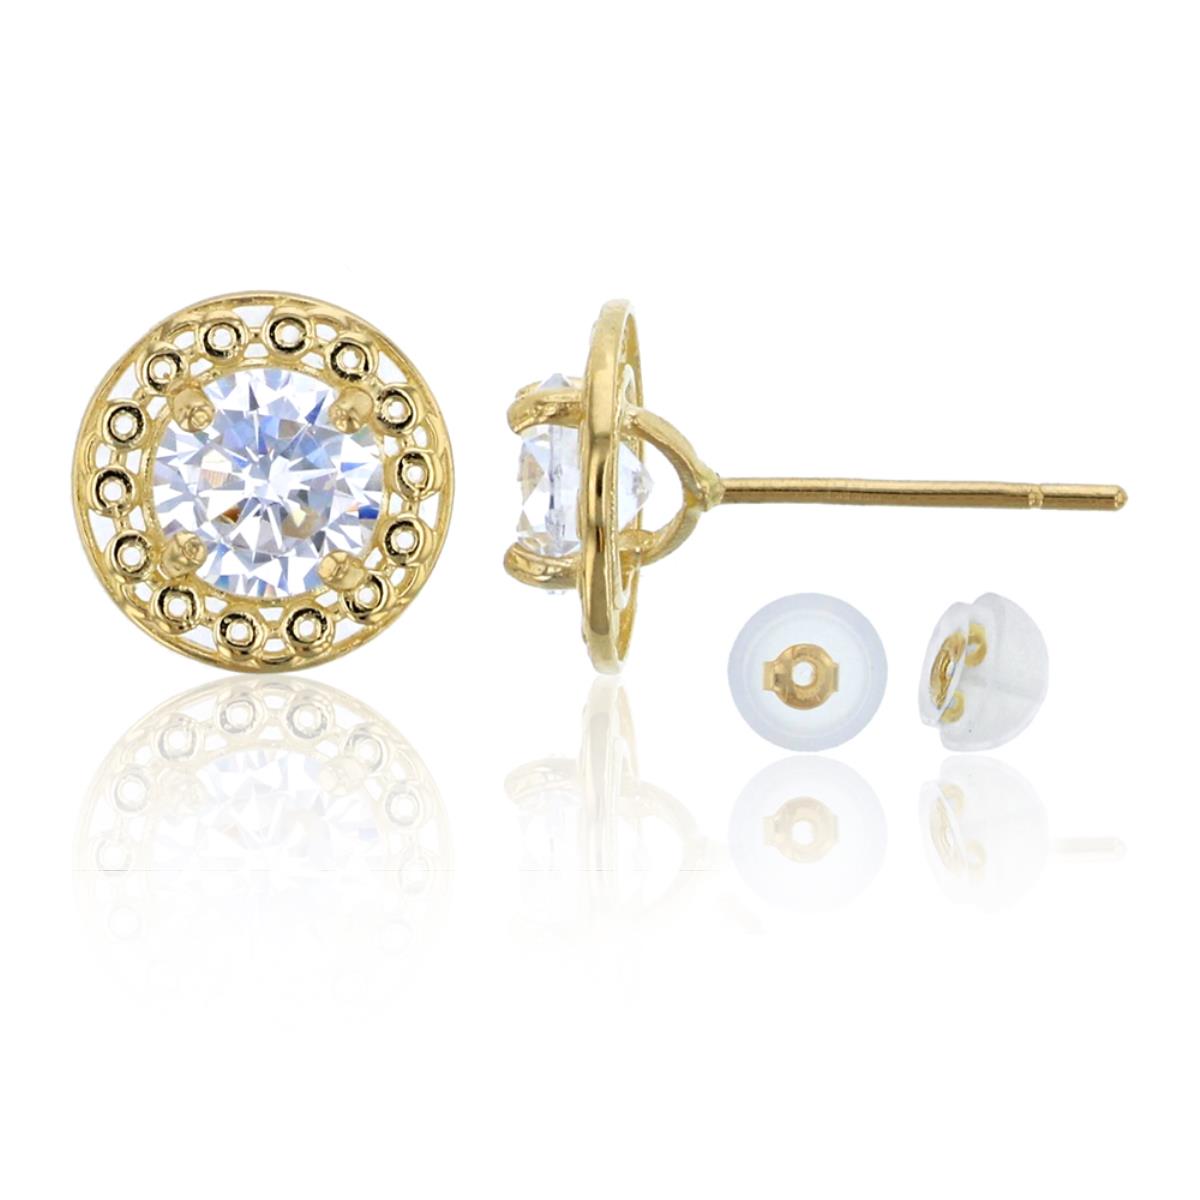 10K Yellow Gold 5mm Round Cut CZ Filigree Stud Earring & 10K Silicone Back